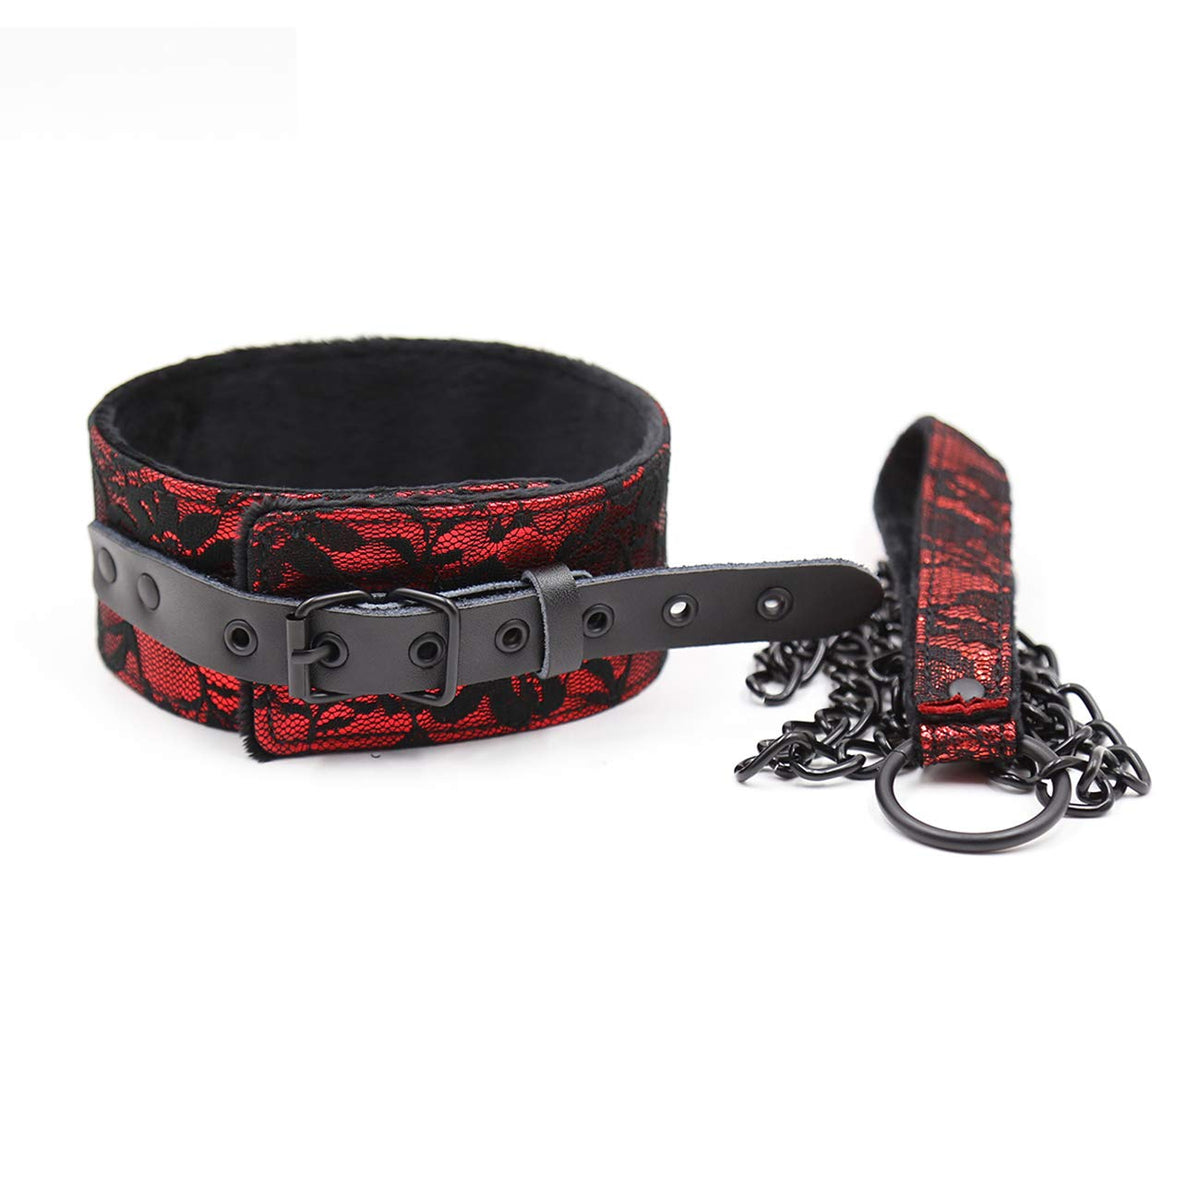 ItspleaZure Red & Black Faux Leather BDSM Collar and Leash